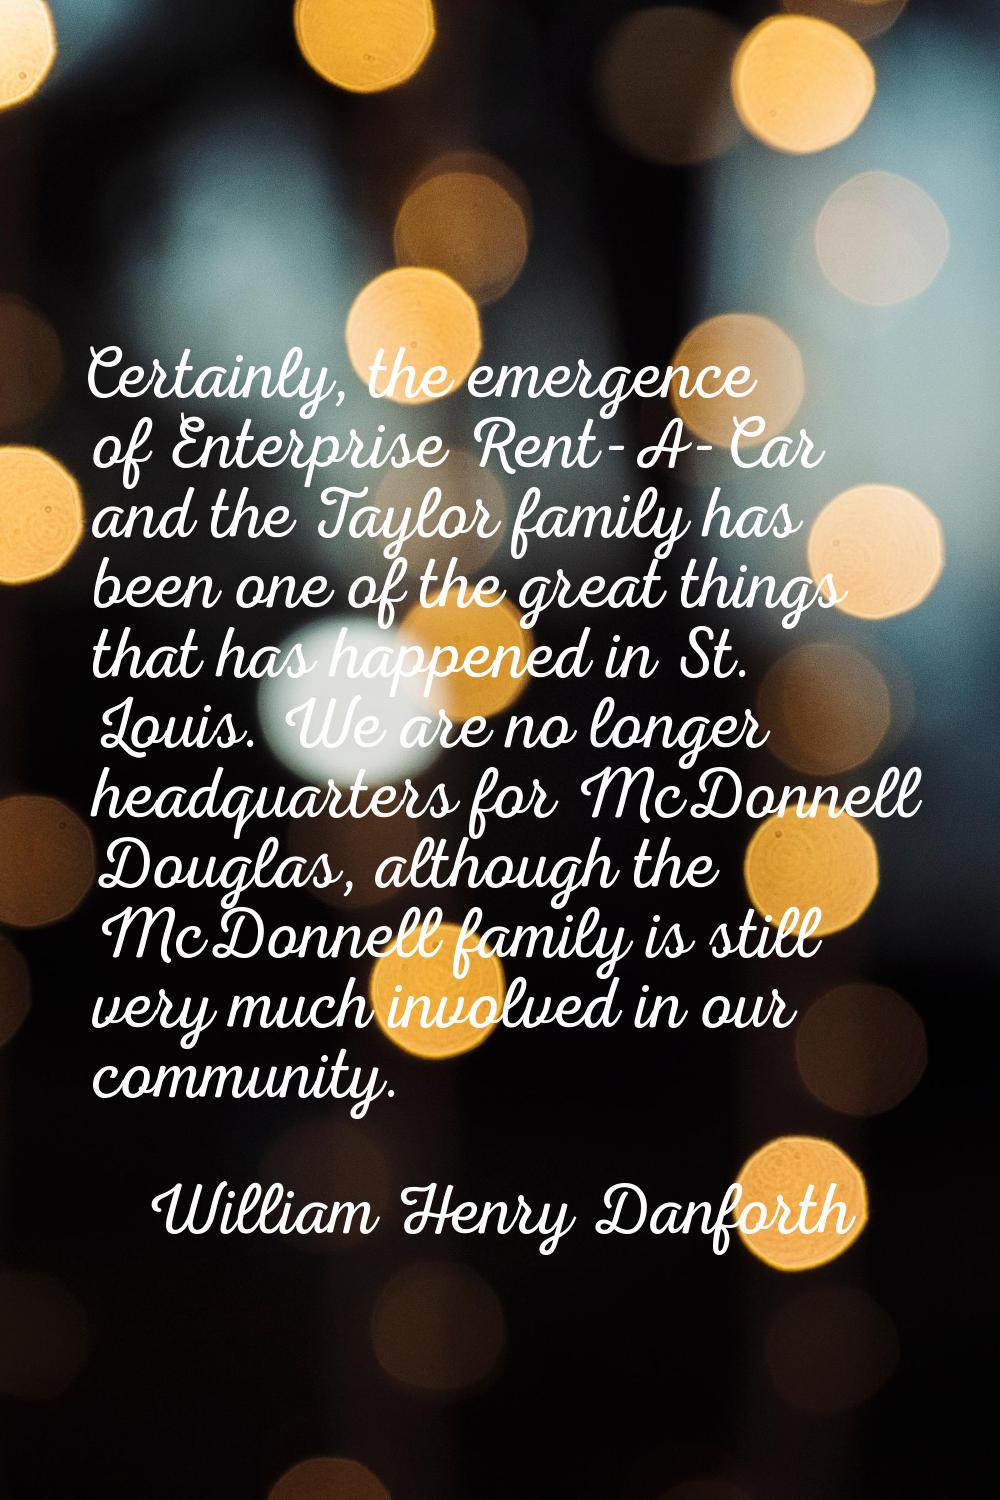 Certainly, the emergence of Enterprise Rent-A-Car and the Taylor family has been one of the great t